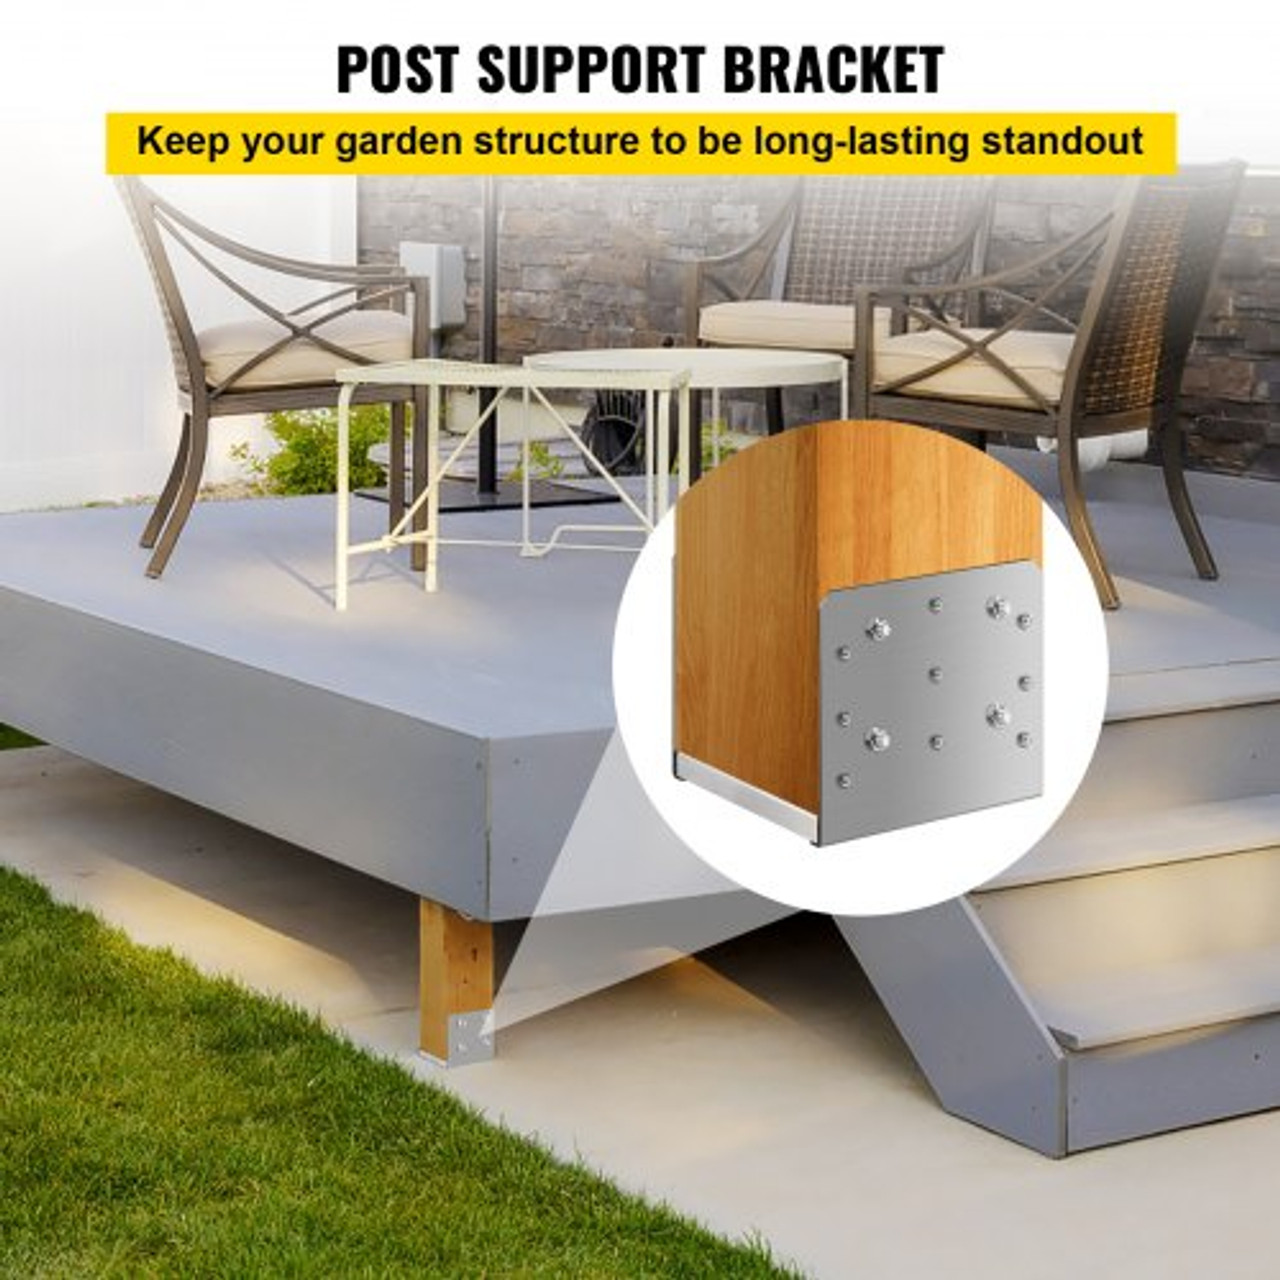 Standoff Post Base 8x8 Inch Adjustable Post Base Post Mender Offers Moisture Protection Adjustable Post Anchor with Fibre Drawing Surface and Full Set of Accessories for Rough Size Lumber (1pc)